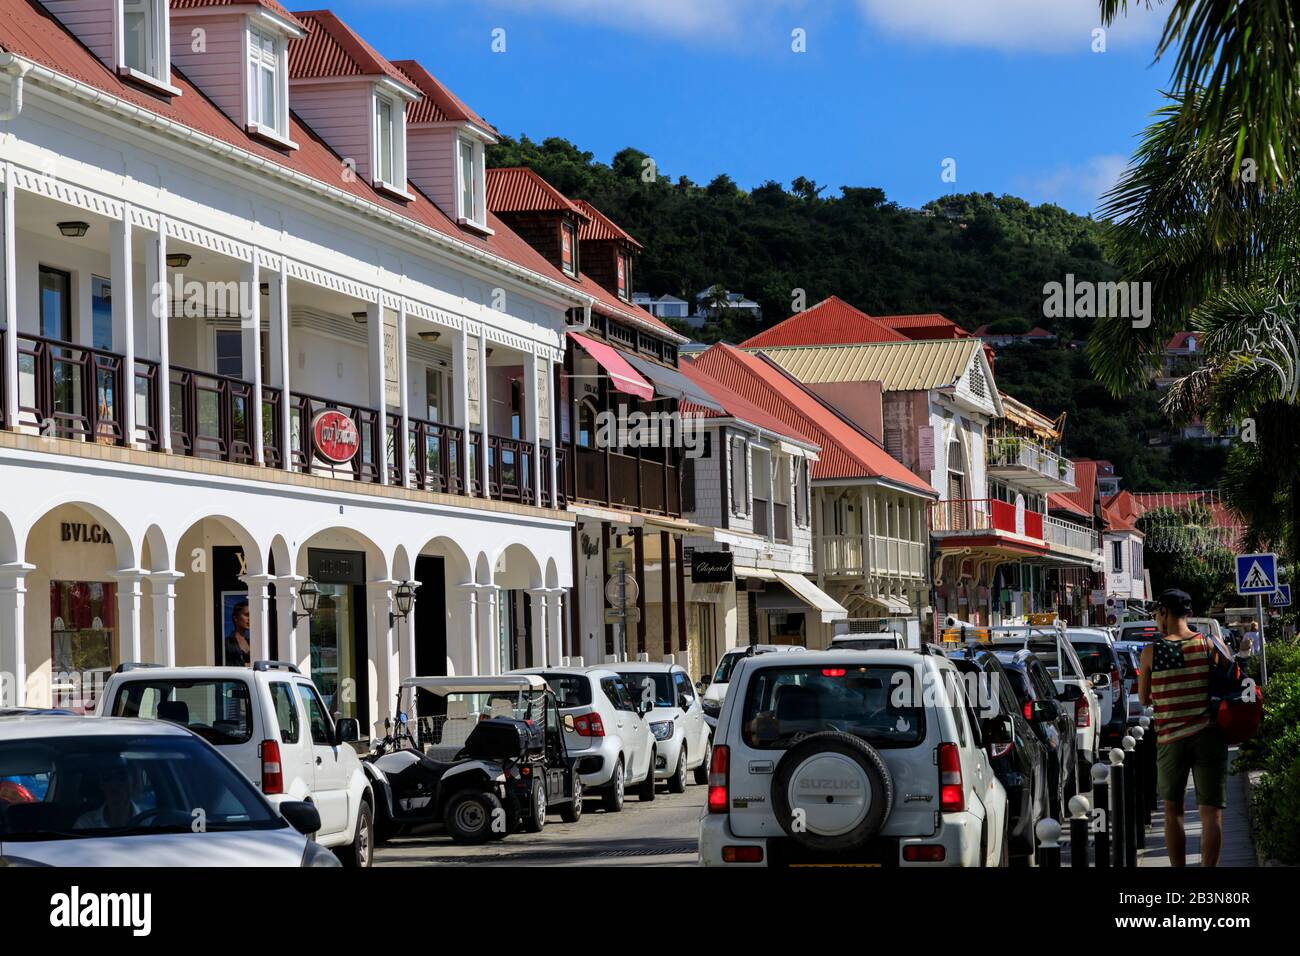 Street view, designer shops, attractive architecture, Gustavia, St.  Barthelemy (St. Barts) (St. Barth), West Indies, Caribbean, Central America  Stock Photo - Alamy